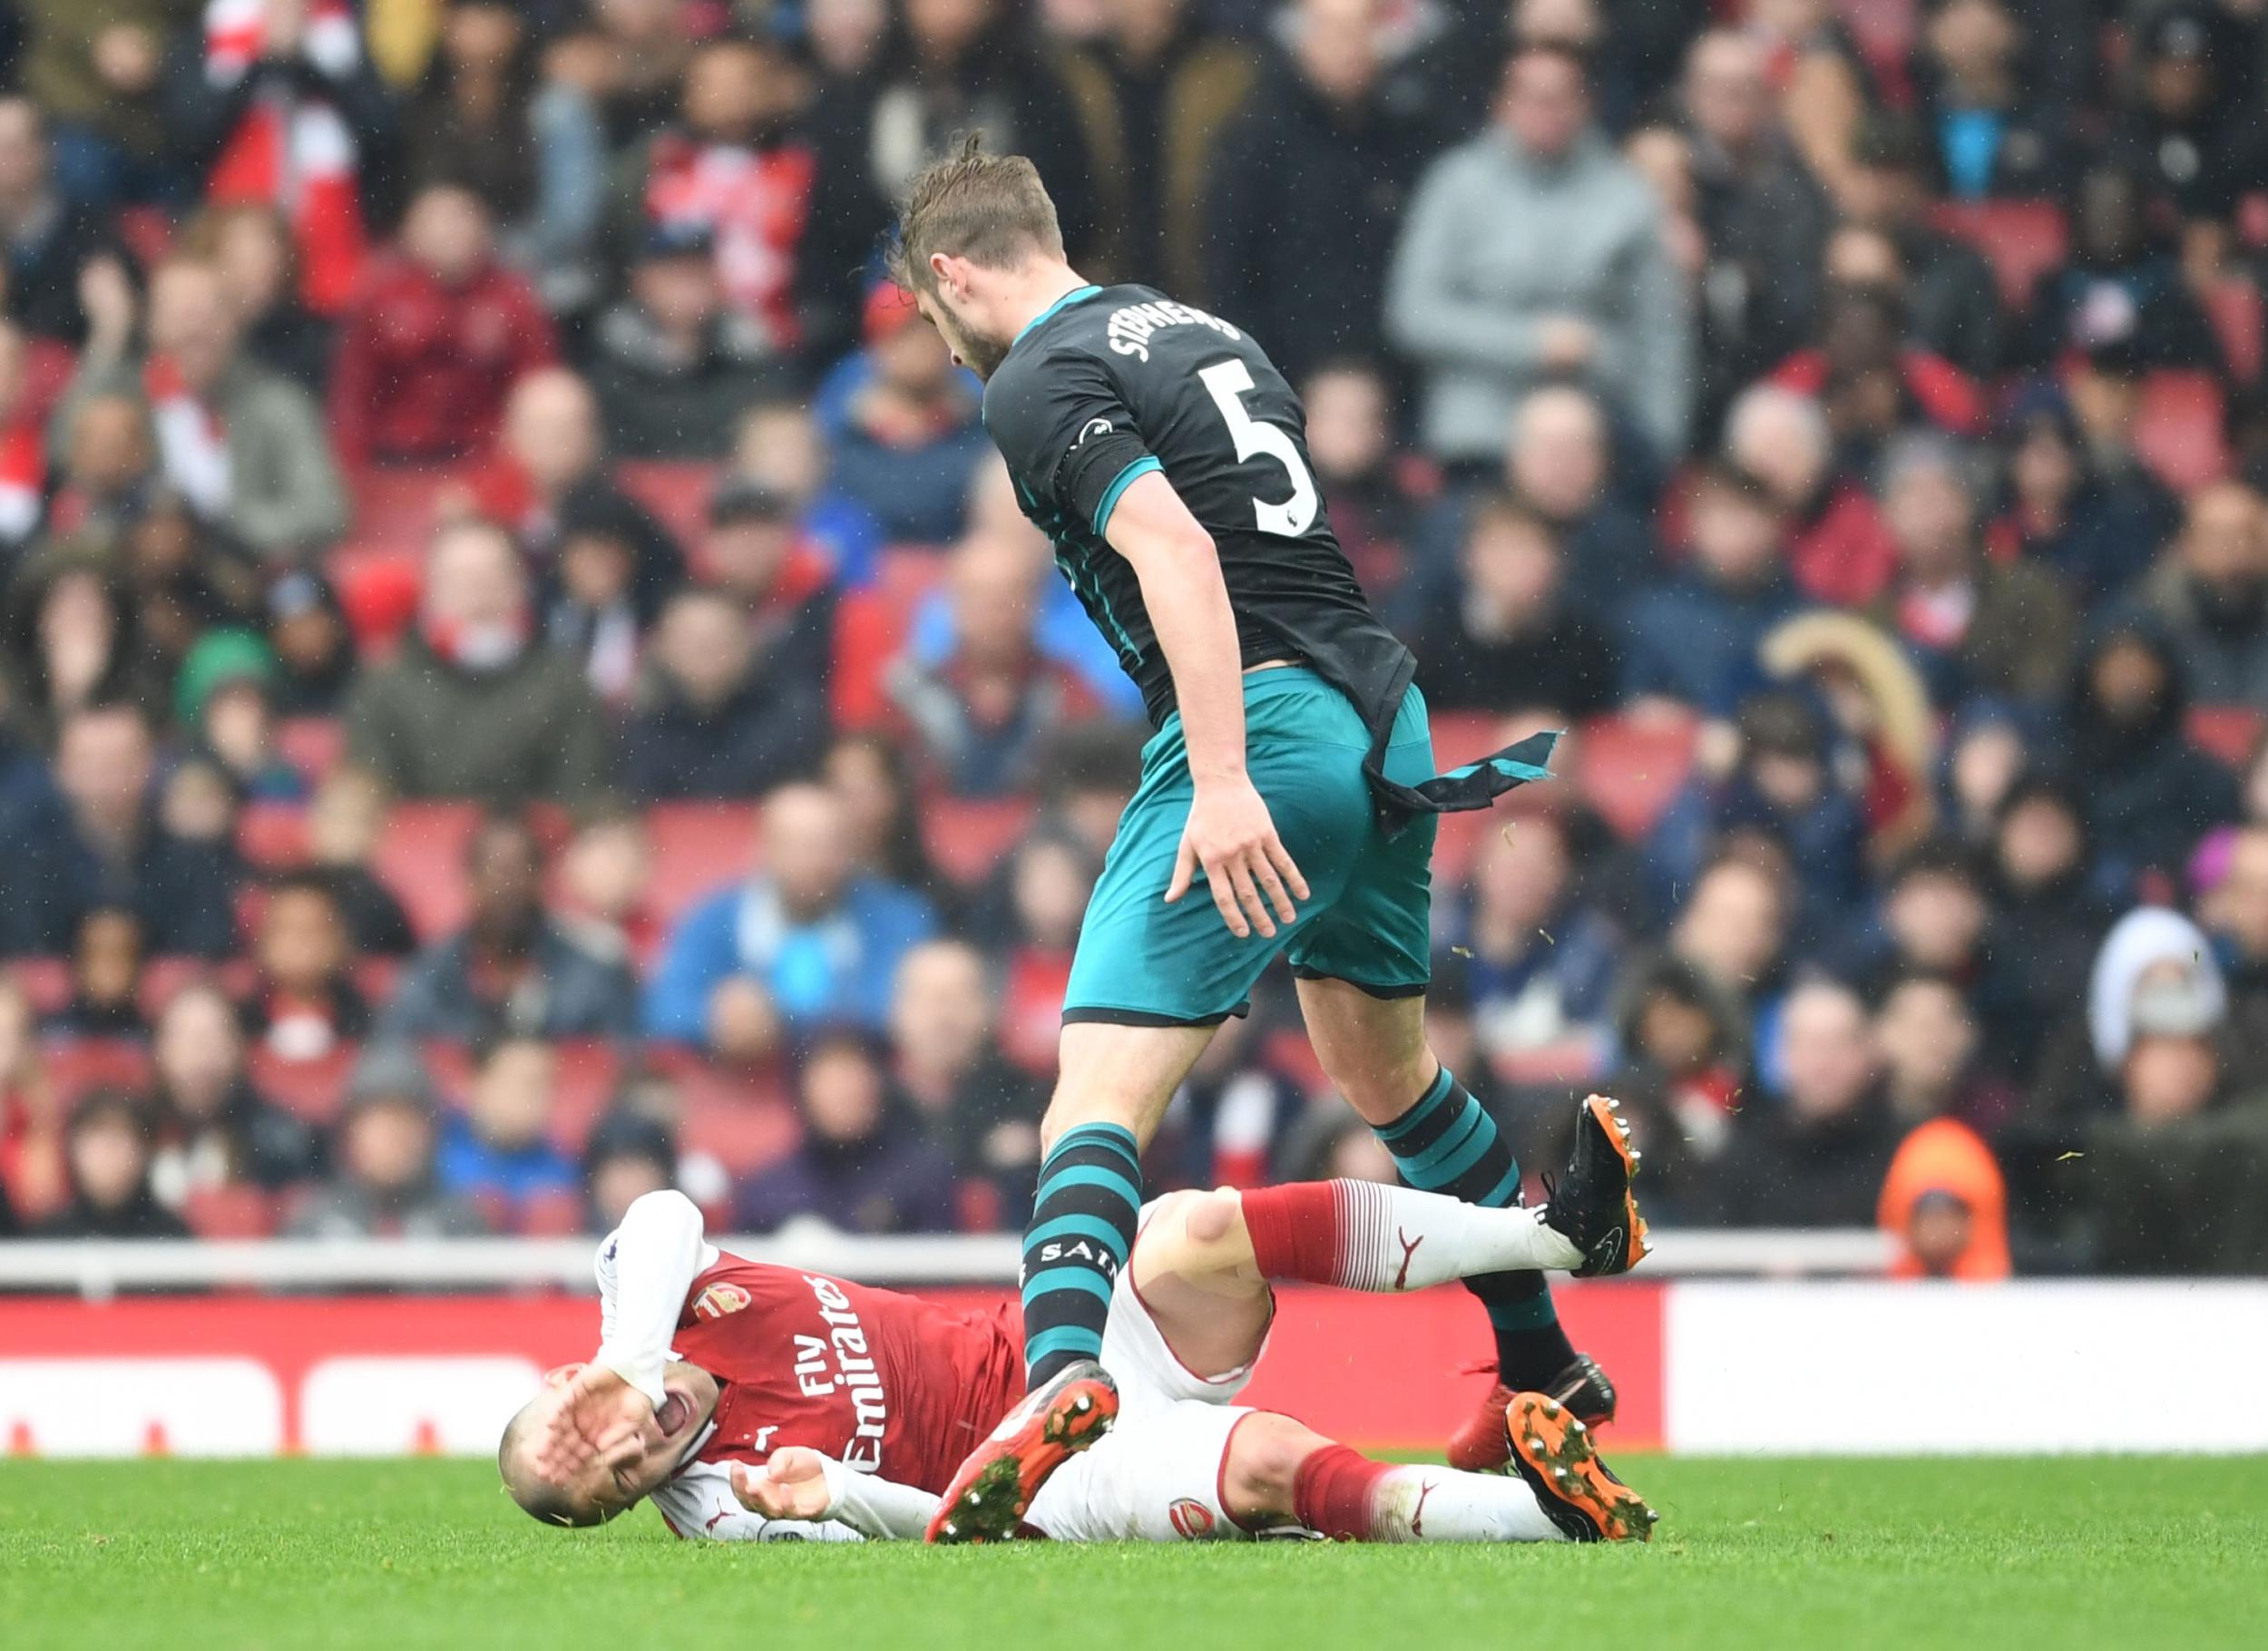 Arsenal&apos;s Jack Wilshere should have been sent off, says Southampton manager Mark Hughes